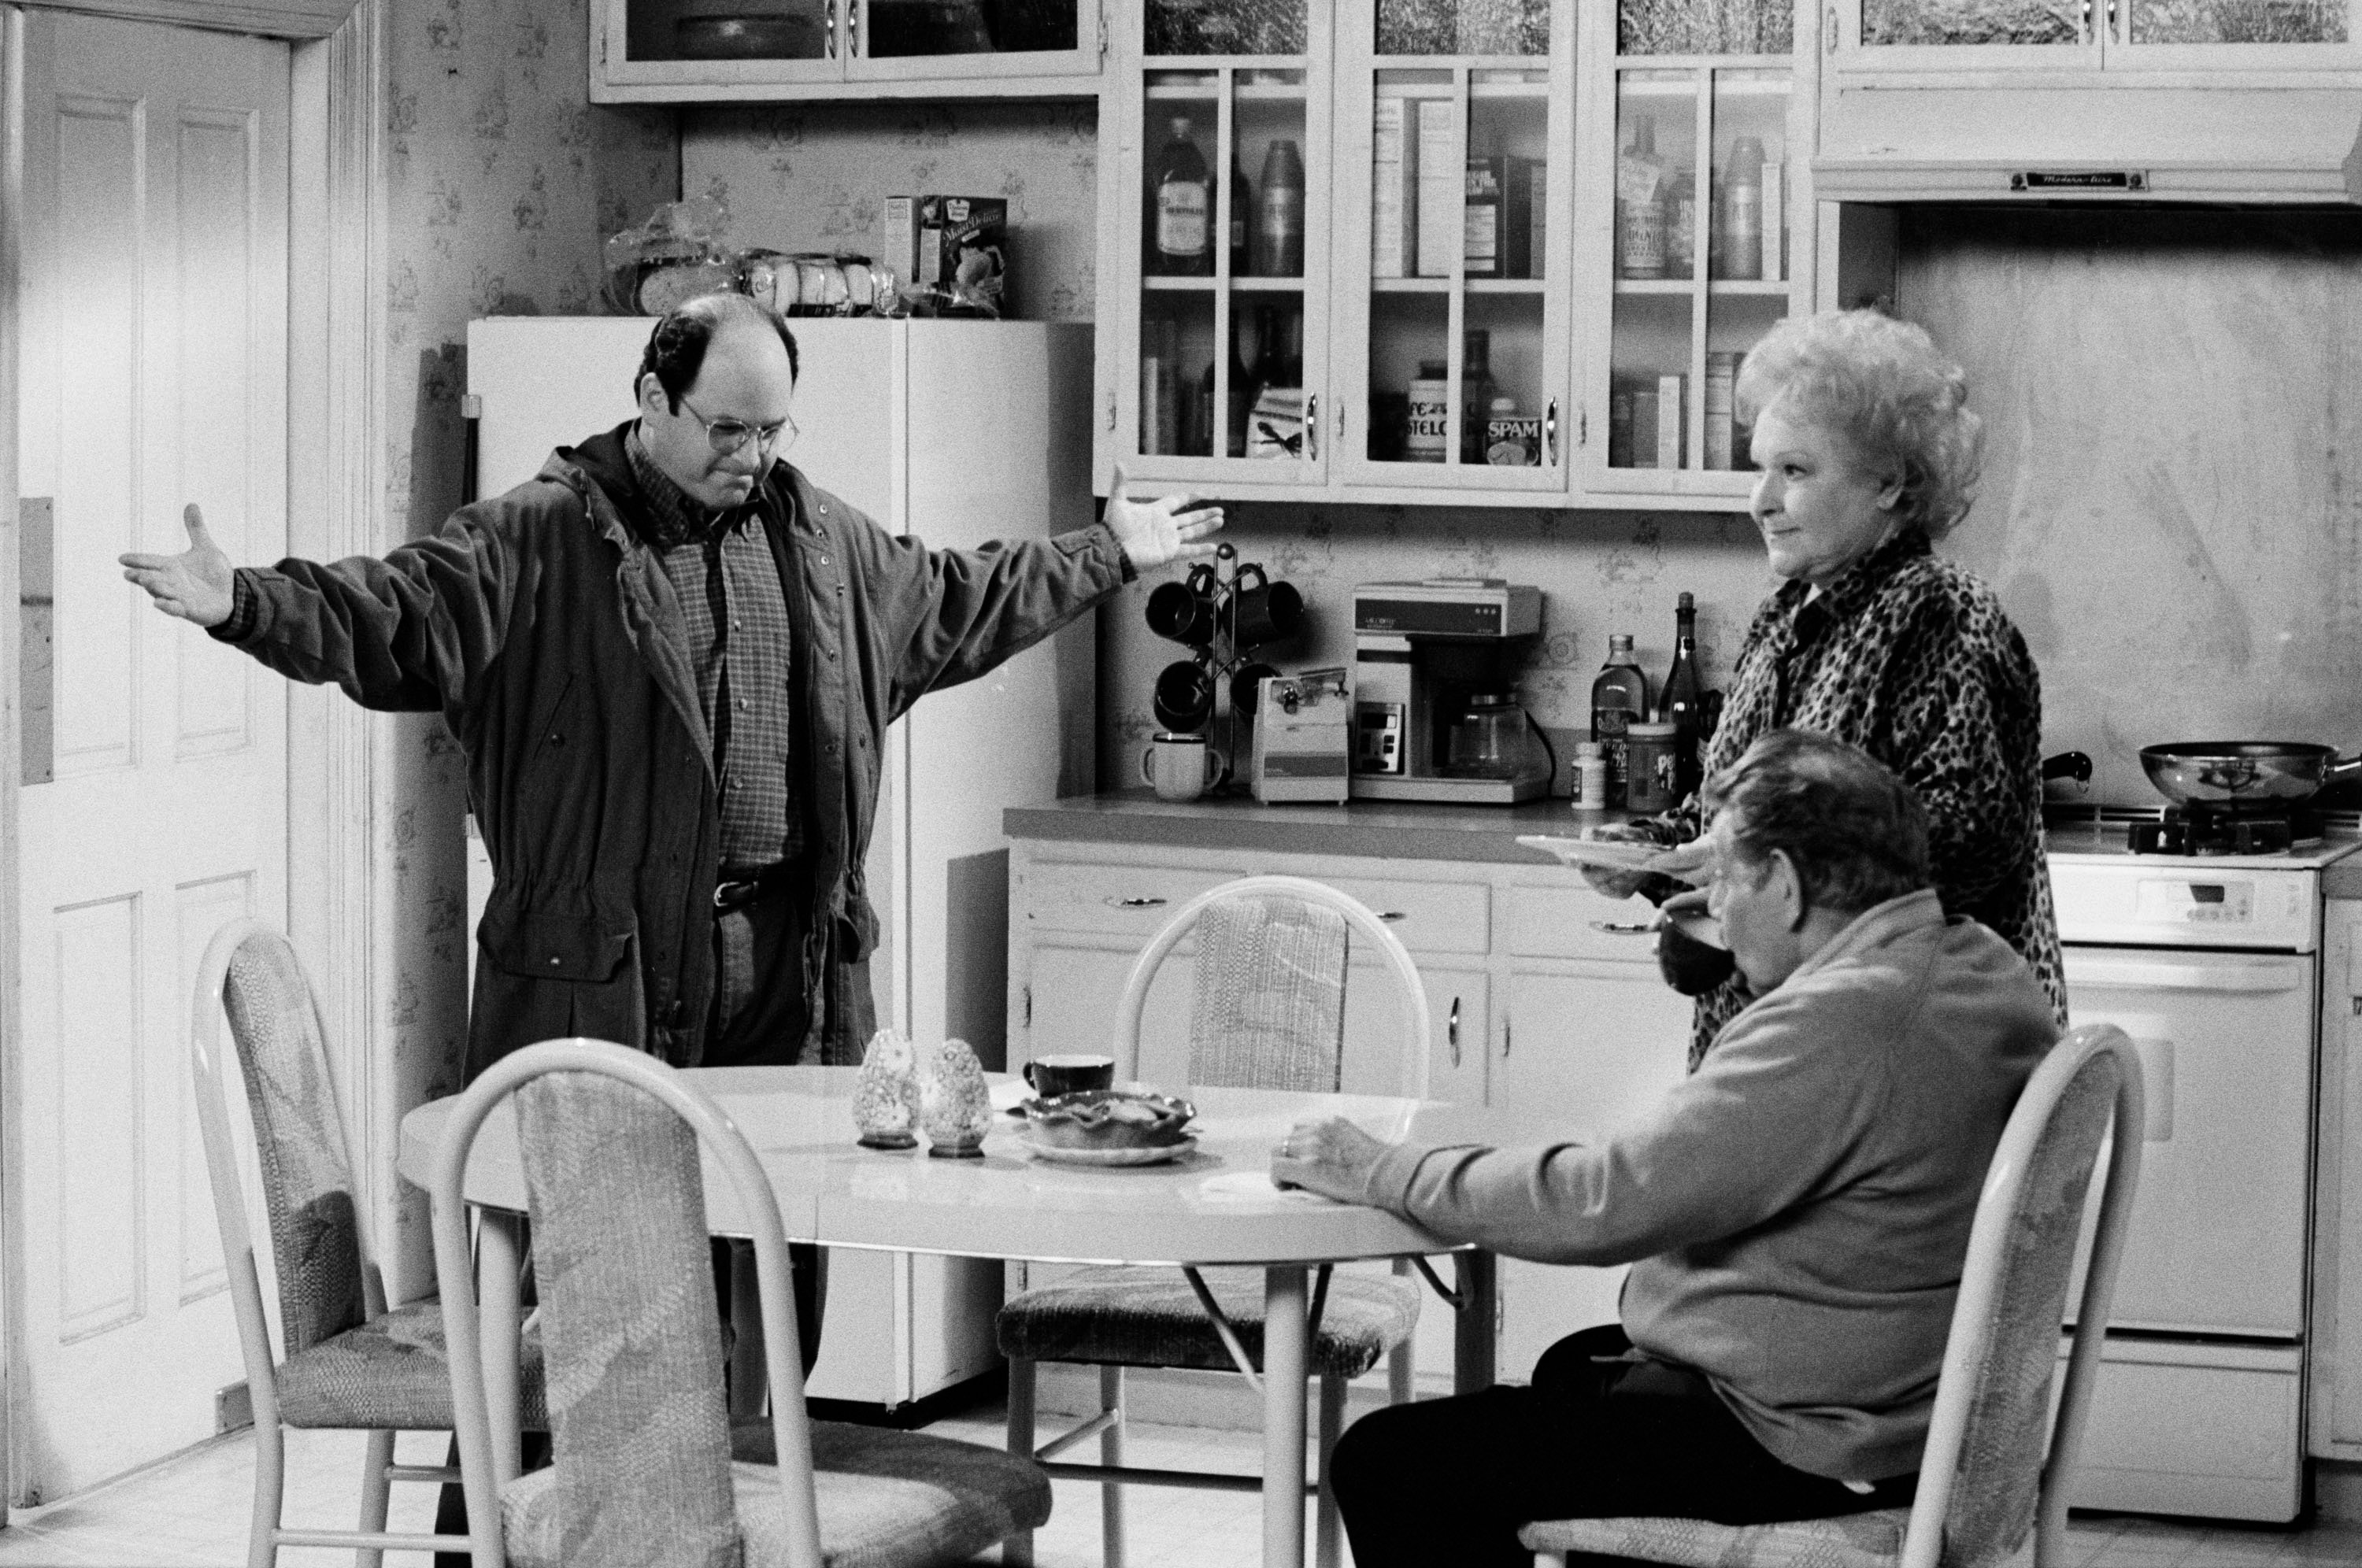 Jason Alexander with Estelle Harris and Jerry Stiller in their kitchen during the filming of 'Seinfeld'